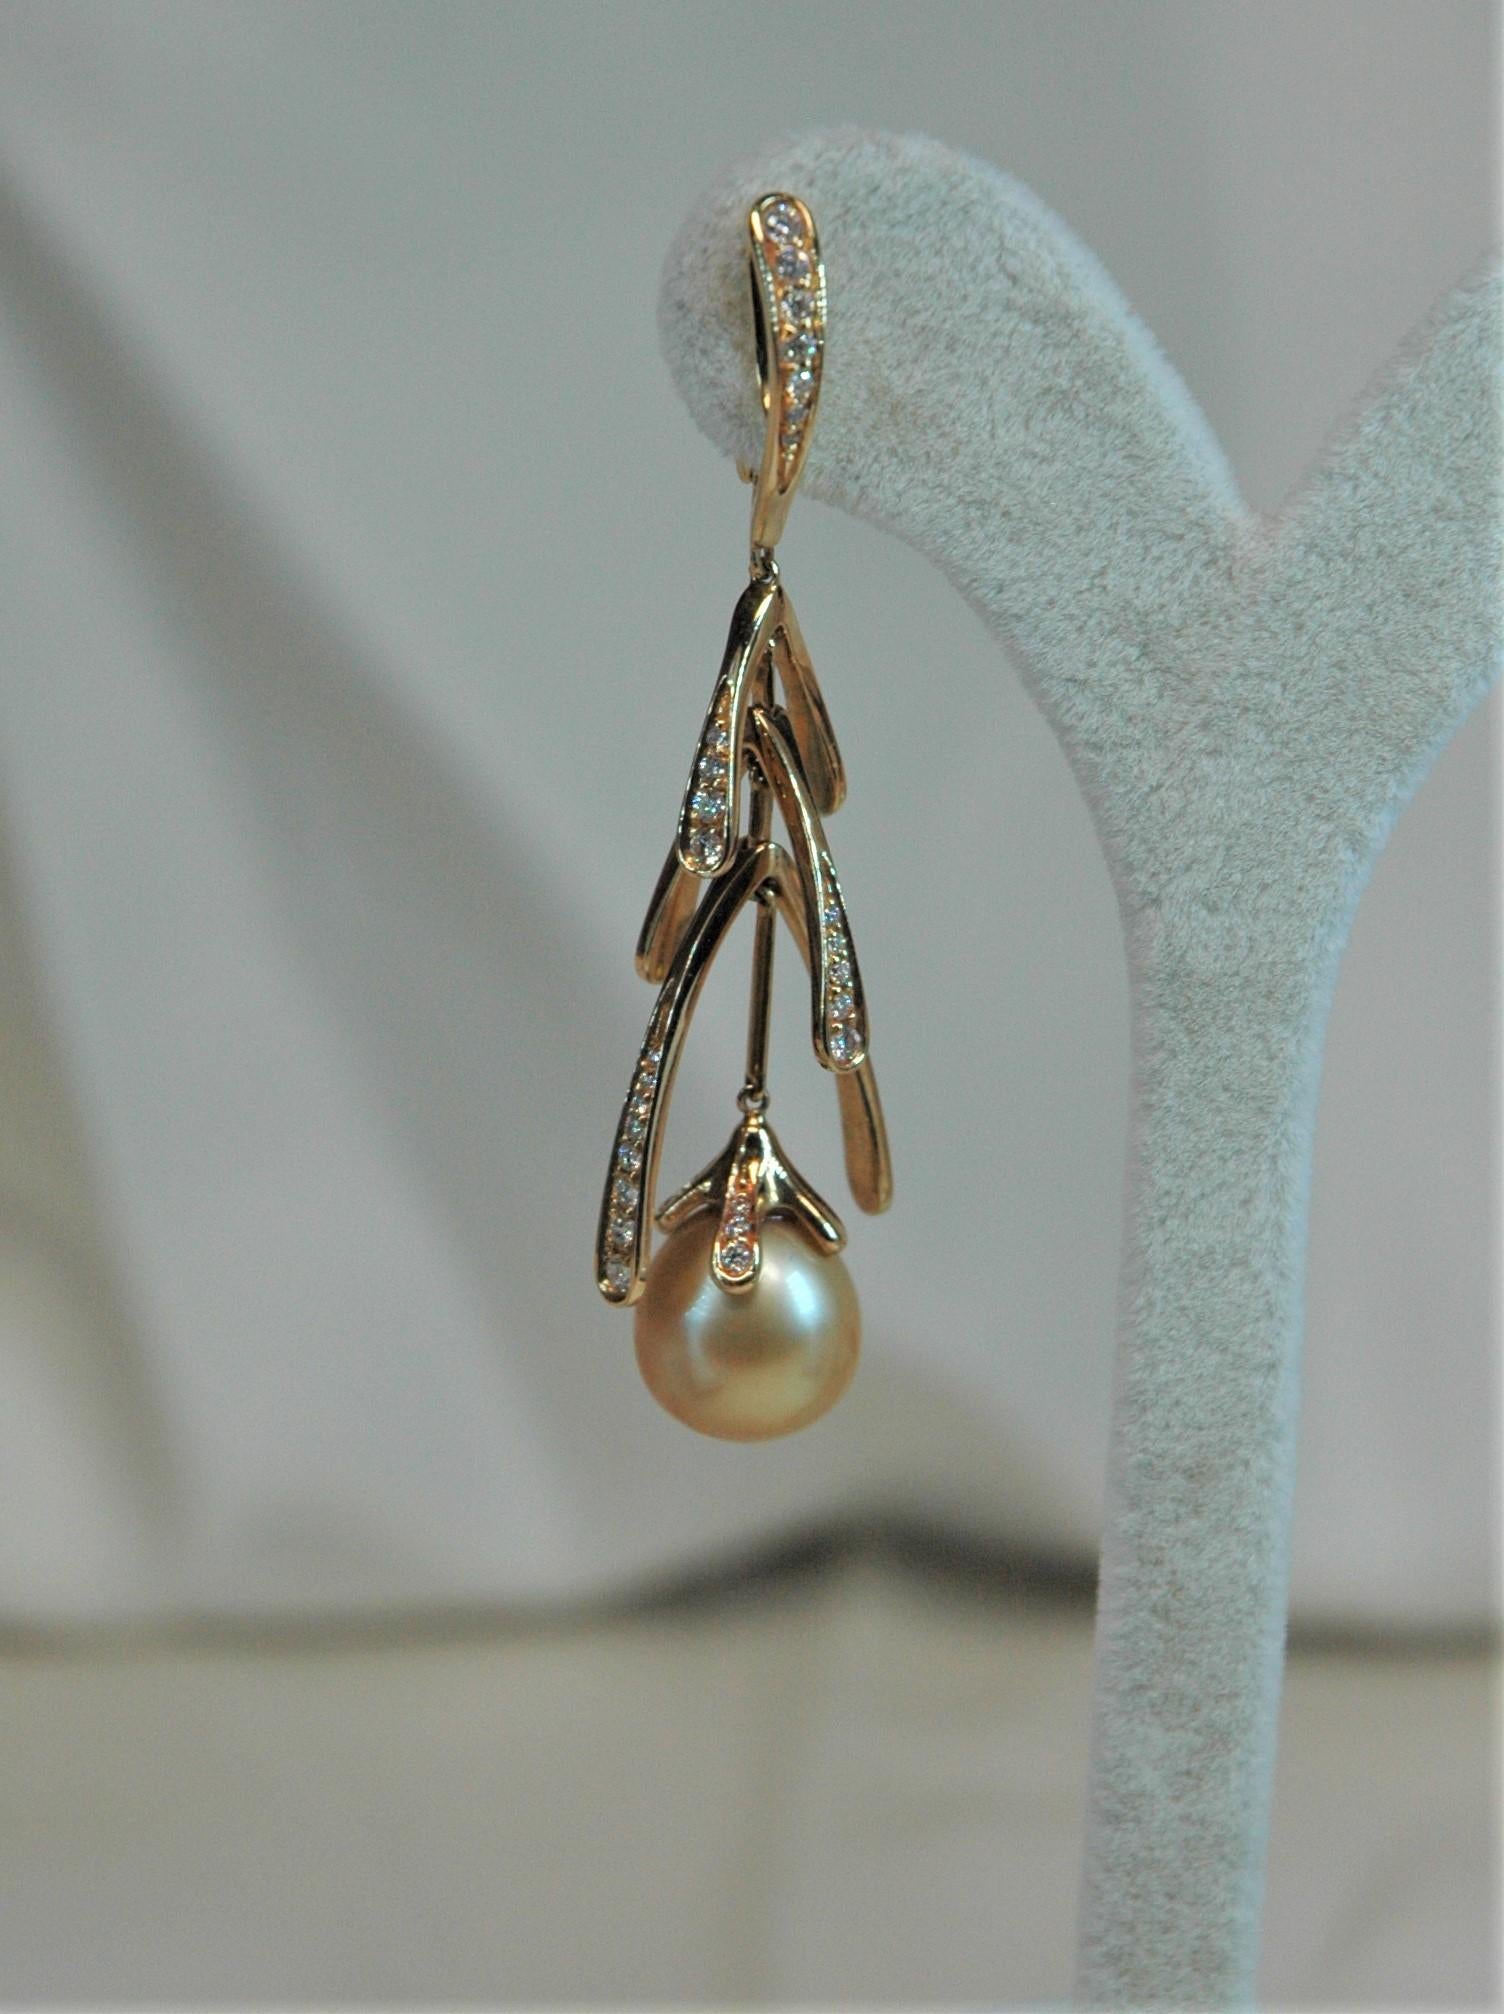 These wonderful earrings are realized in yellow gold with diamonds and golden pearls. They are completely mobile in their length and this gives them a noticeable light in movement. There is also the perfect ring for them, always with diamonds and a